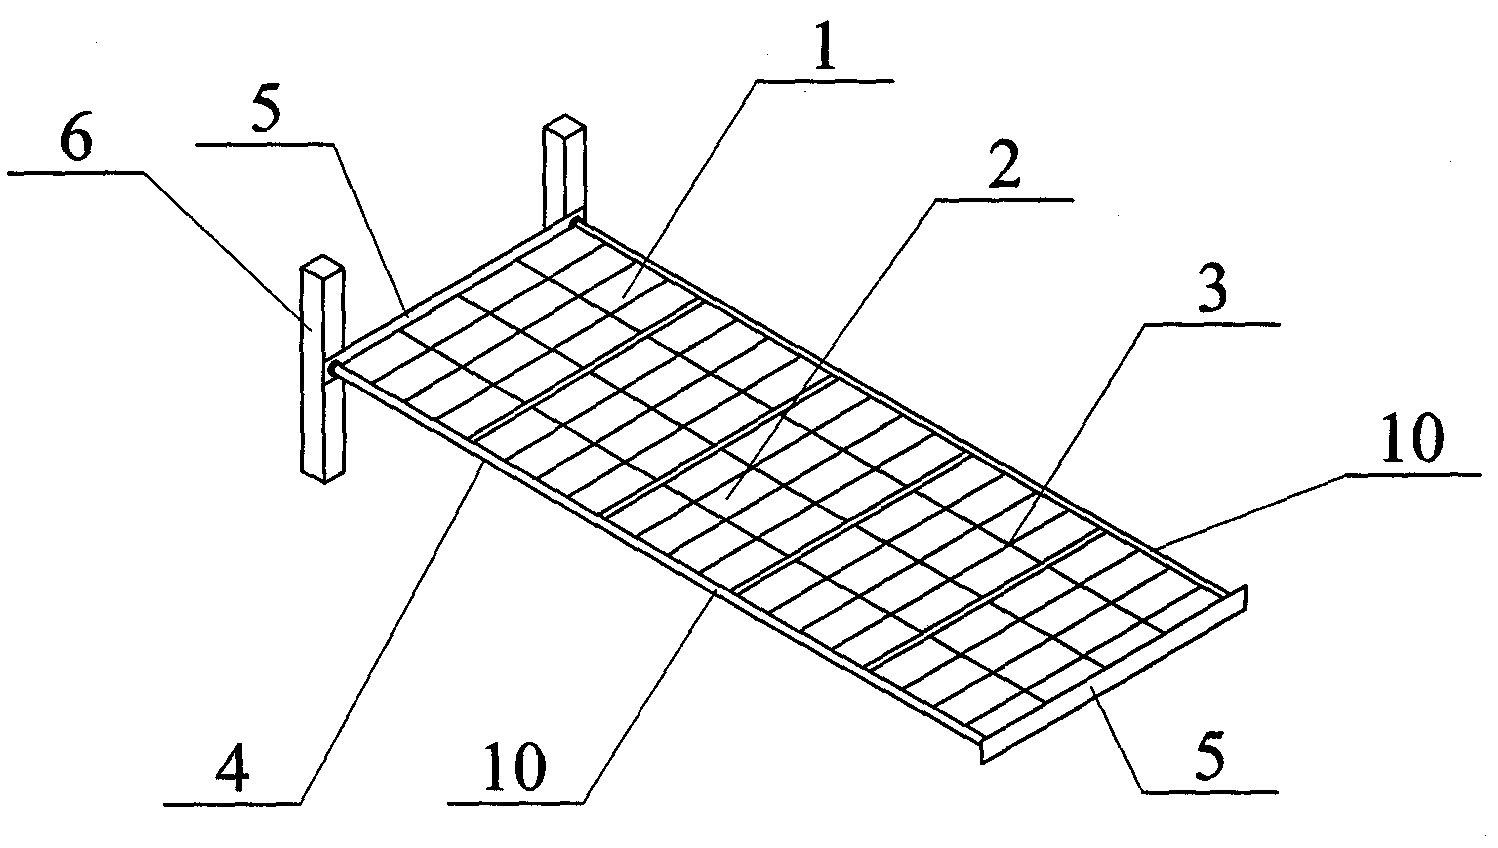 Inflation expansion truss solar panel array capable of on-orbit assembly